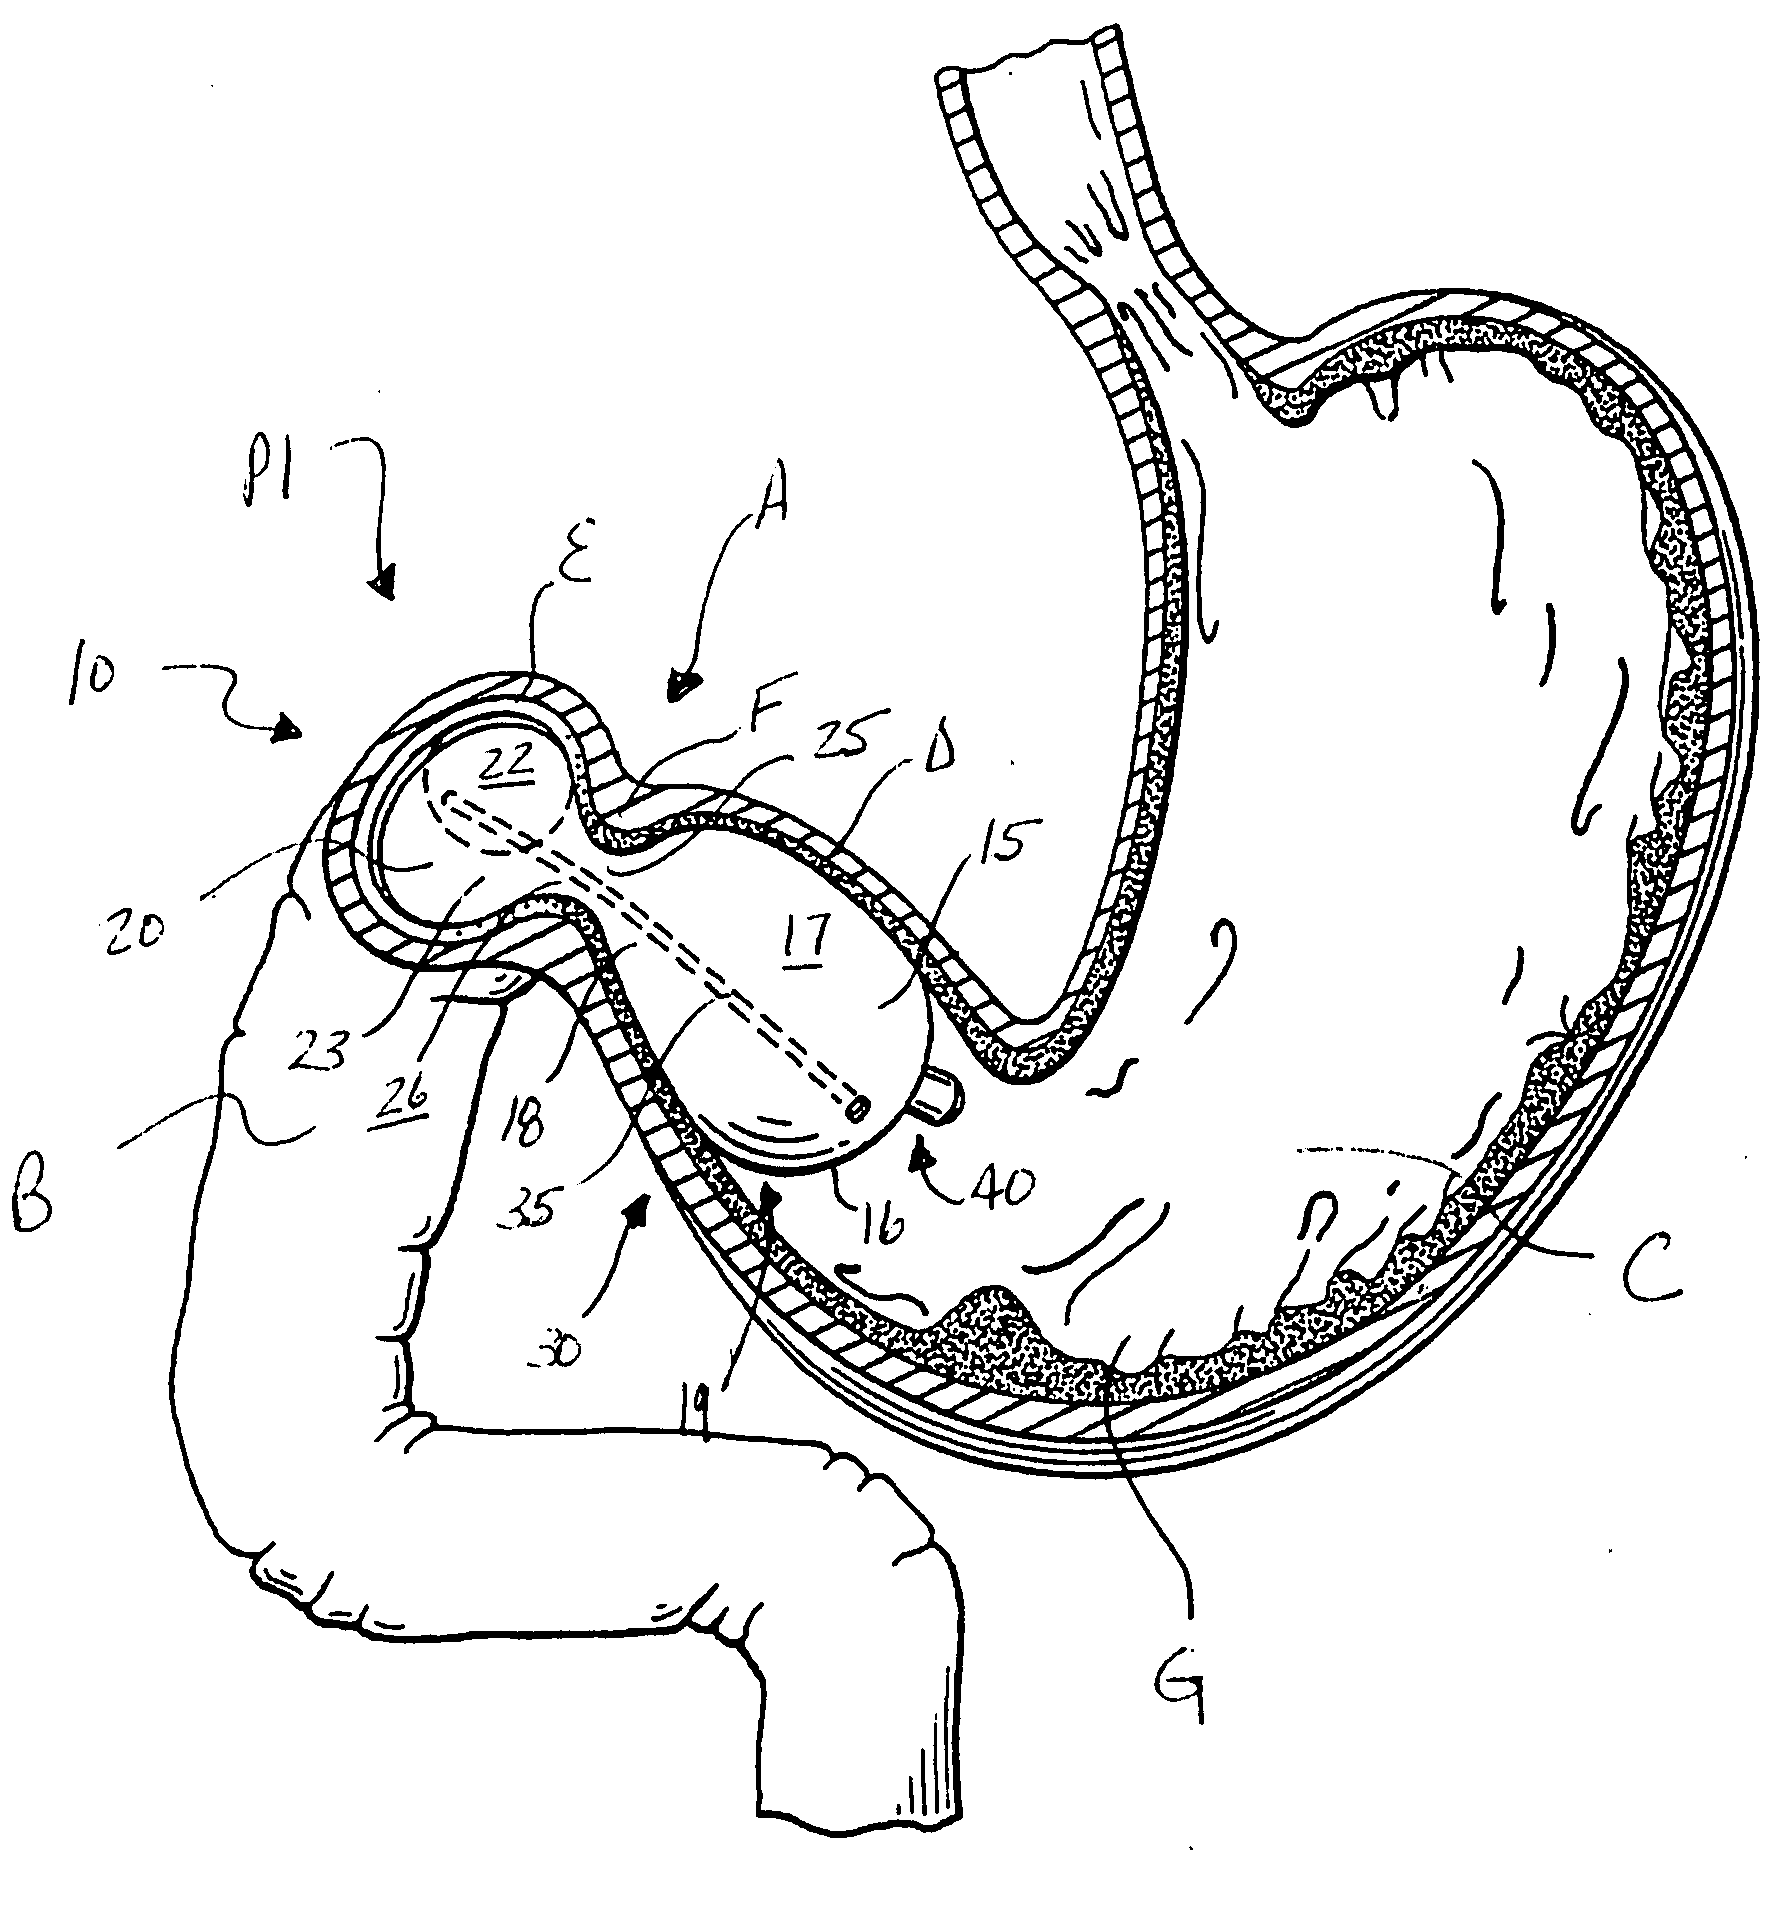 Method for treating obesity using an implantable weight loss device